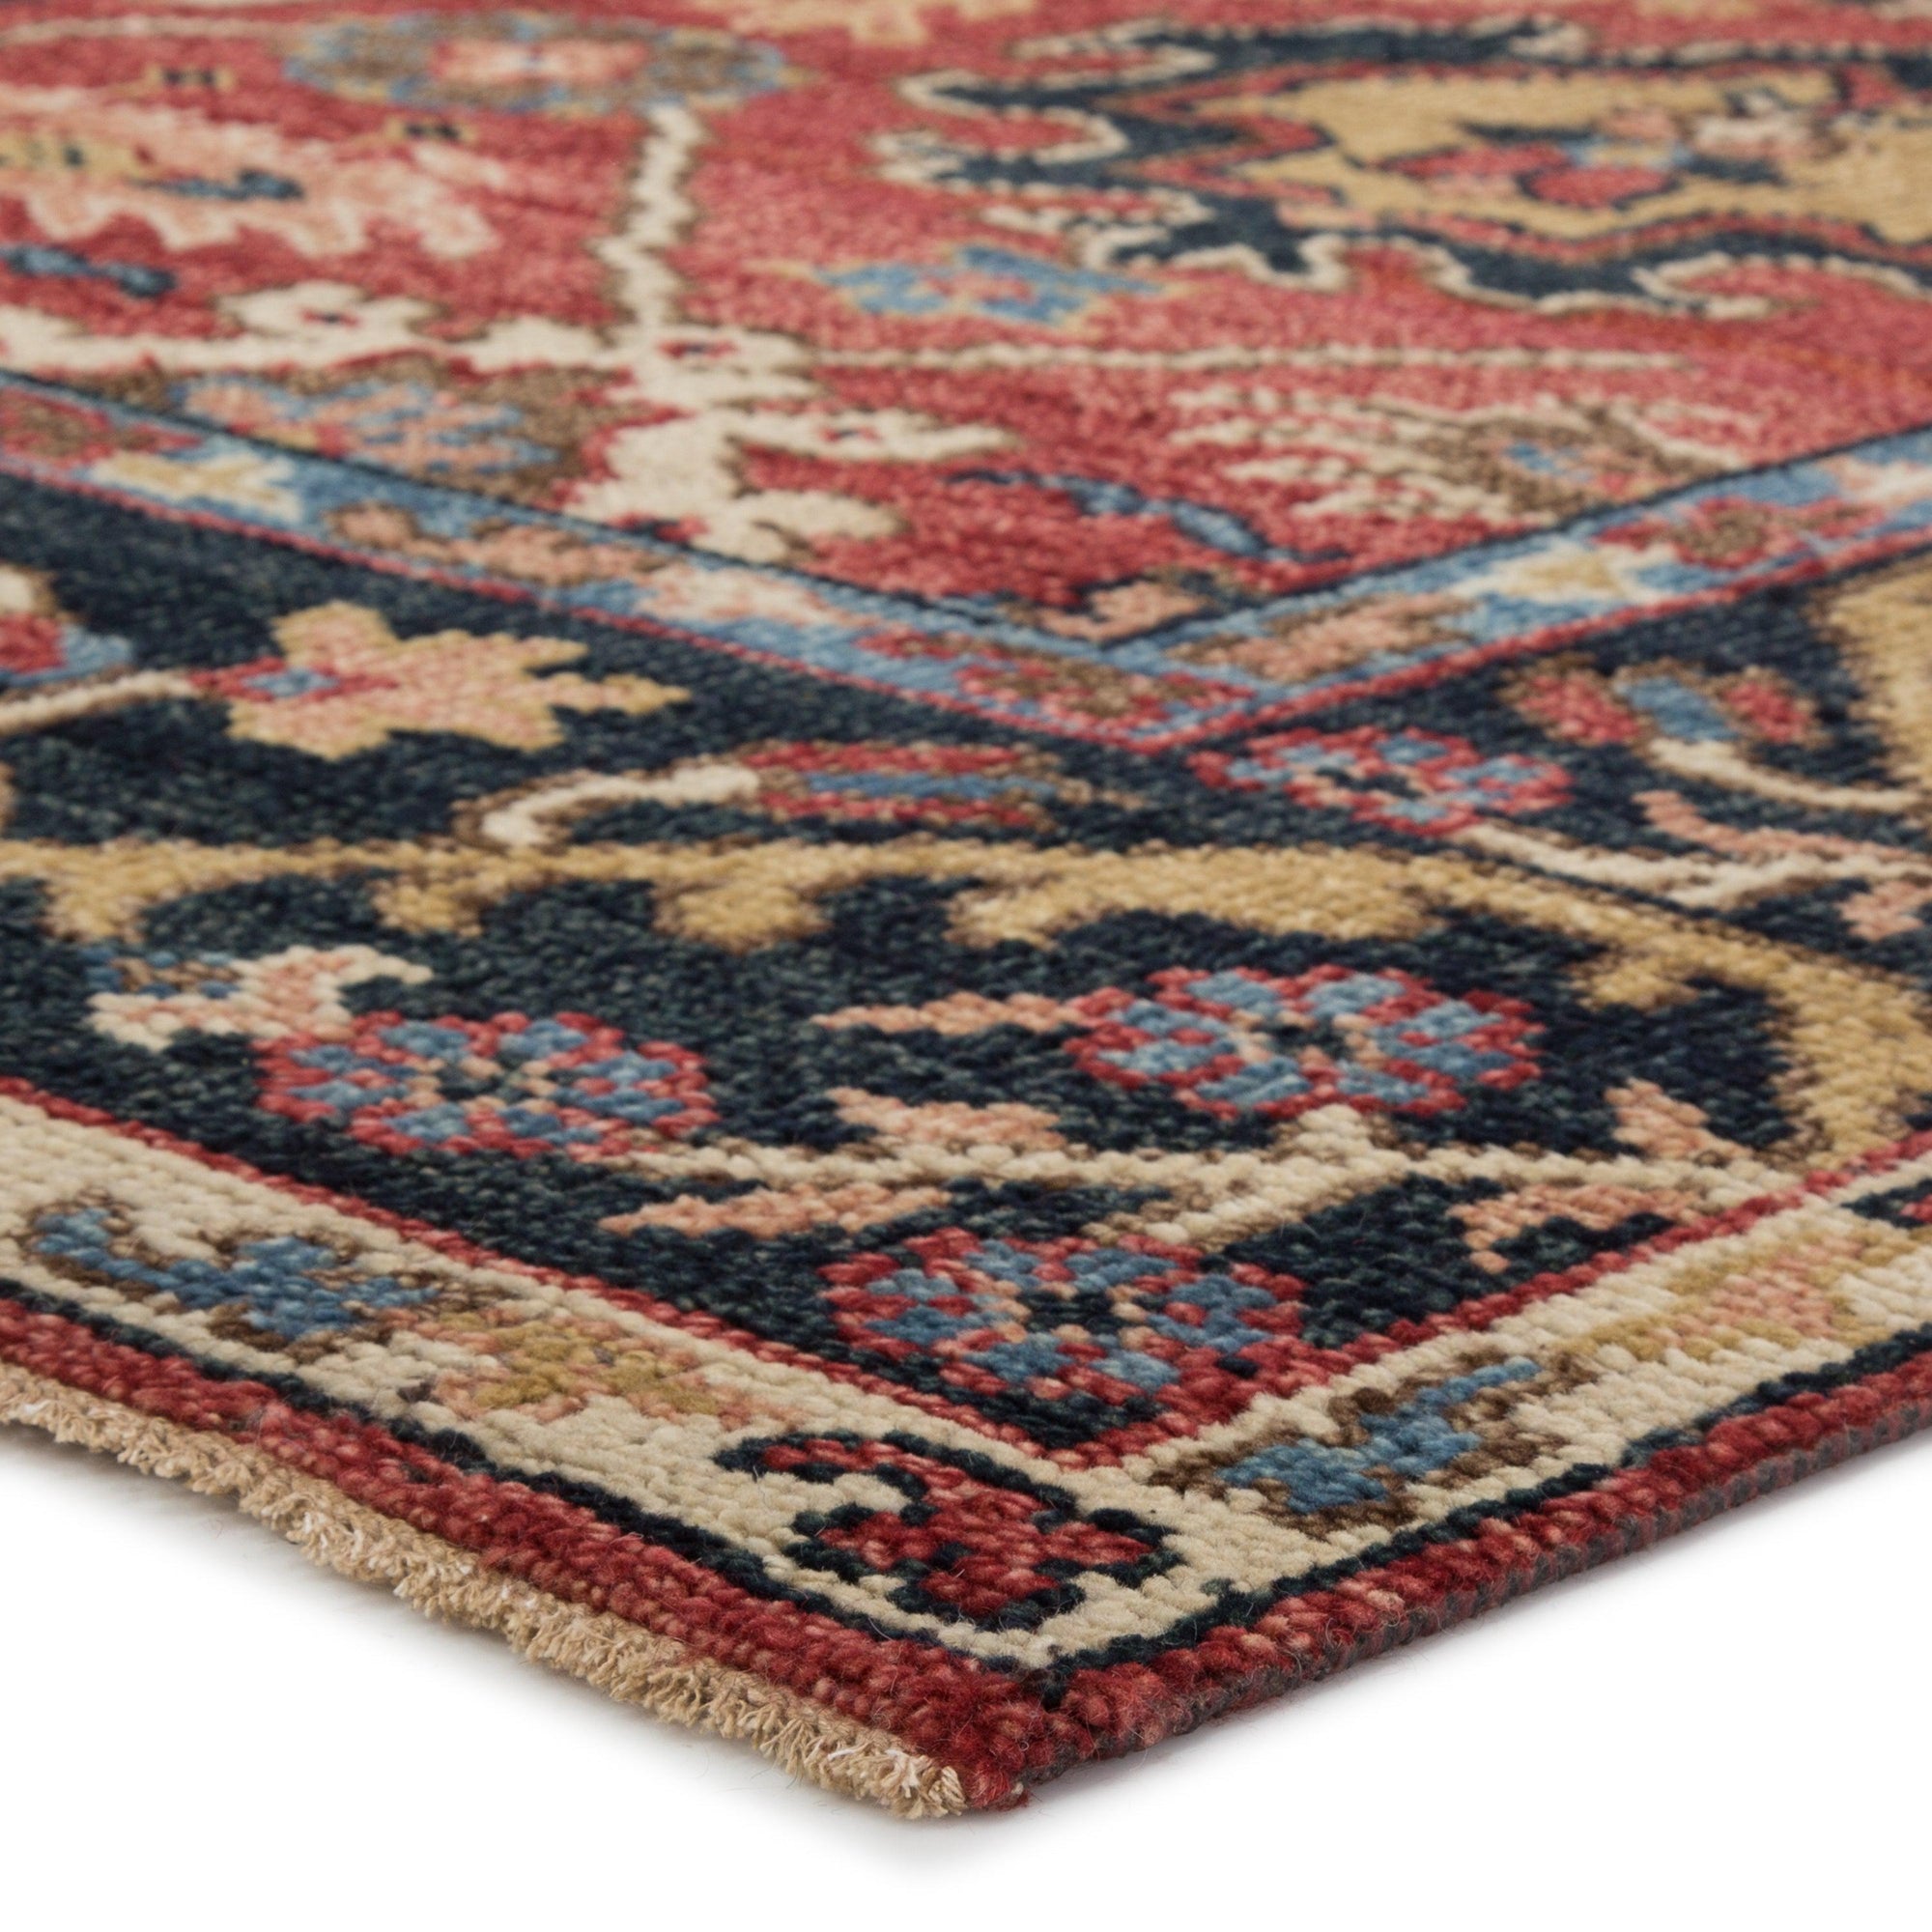 Rugs by Roo | Jaipur Living Aika Hand-Knotted Medallion Red Multicolor Area Rug-RUG140300